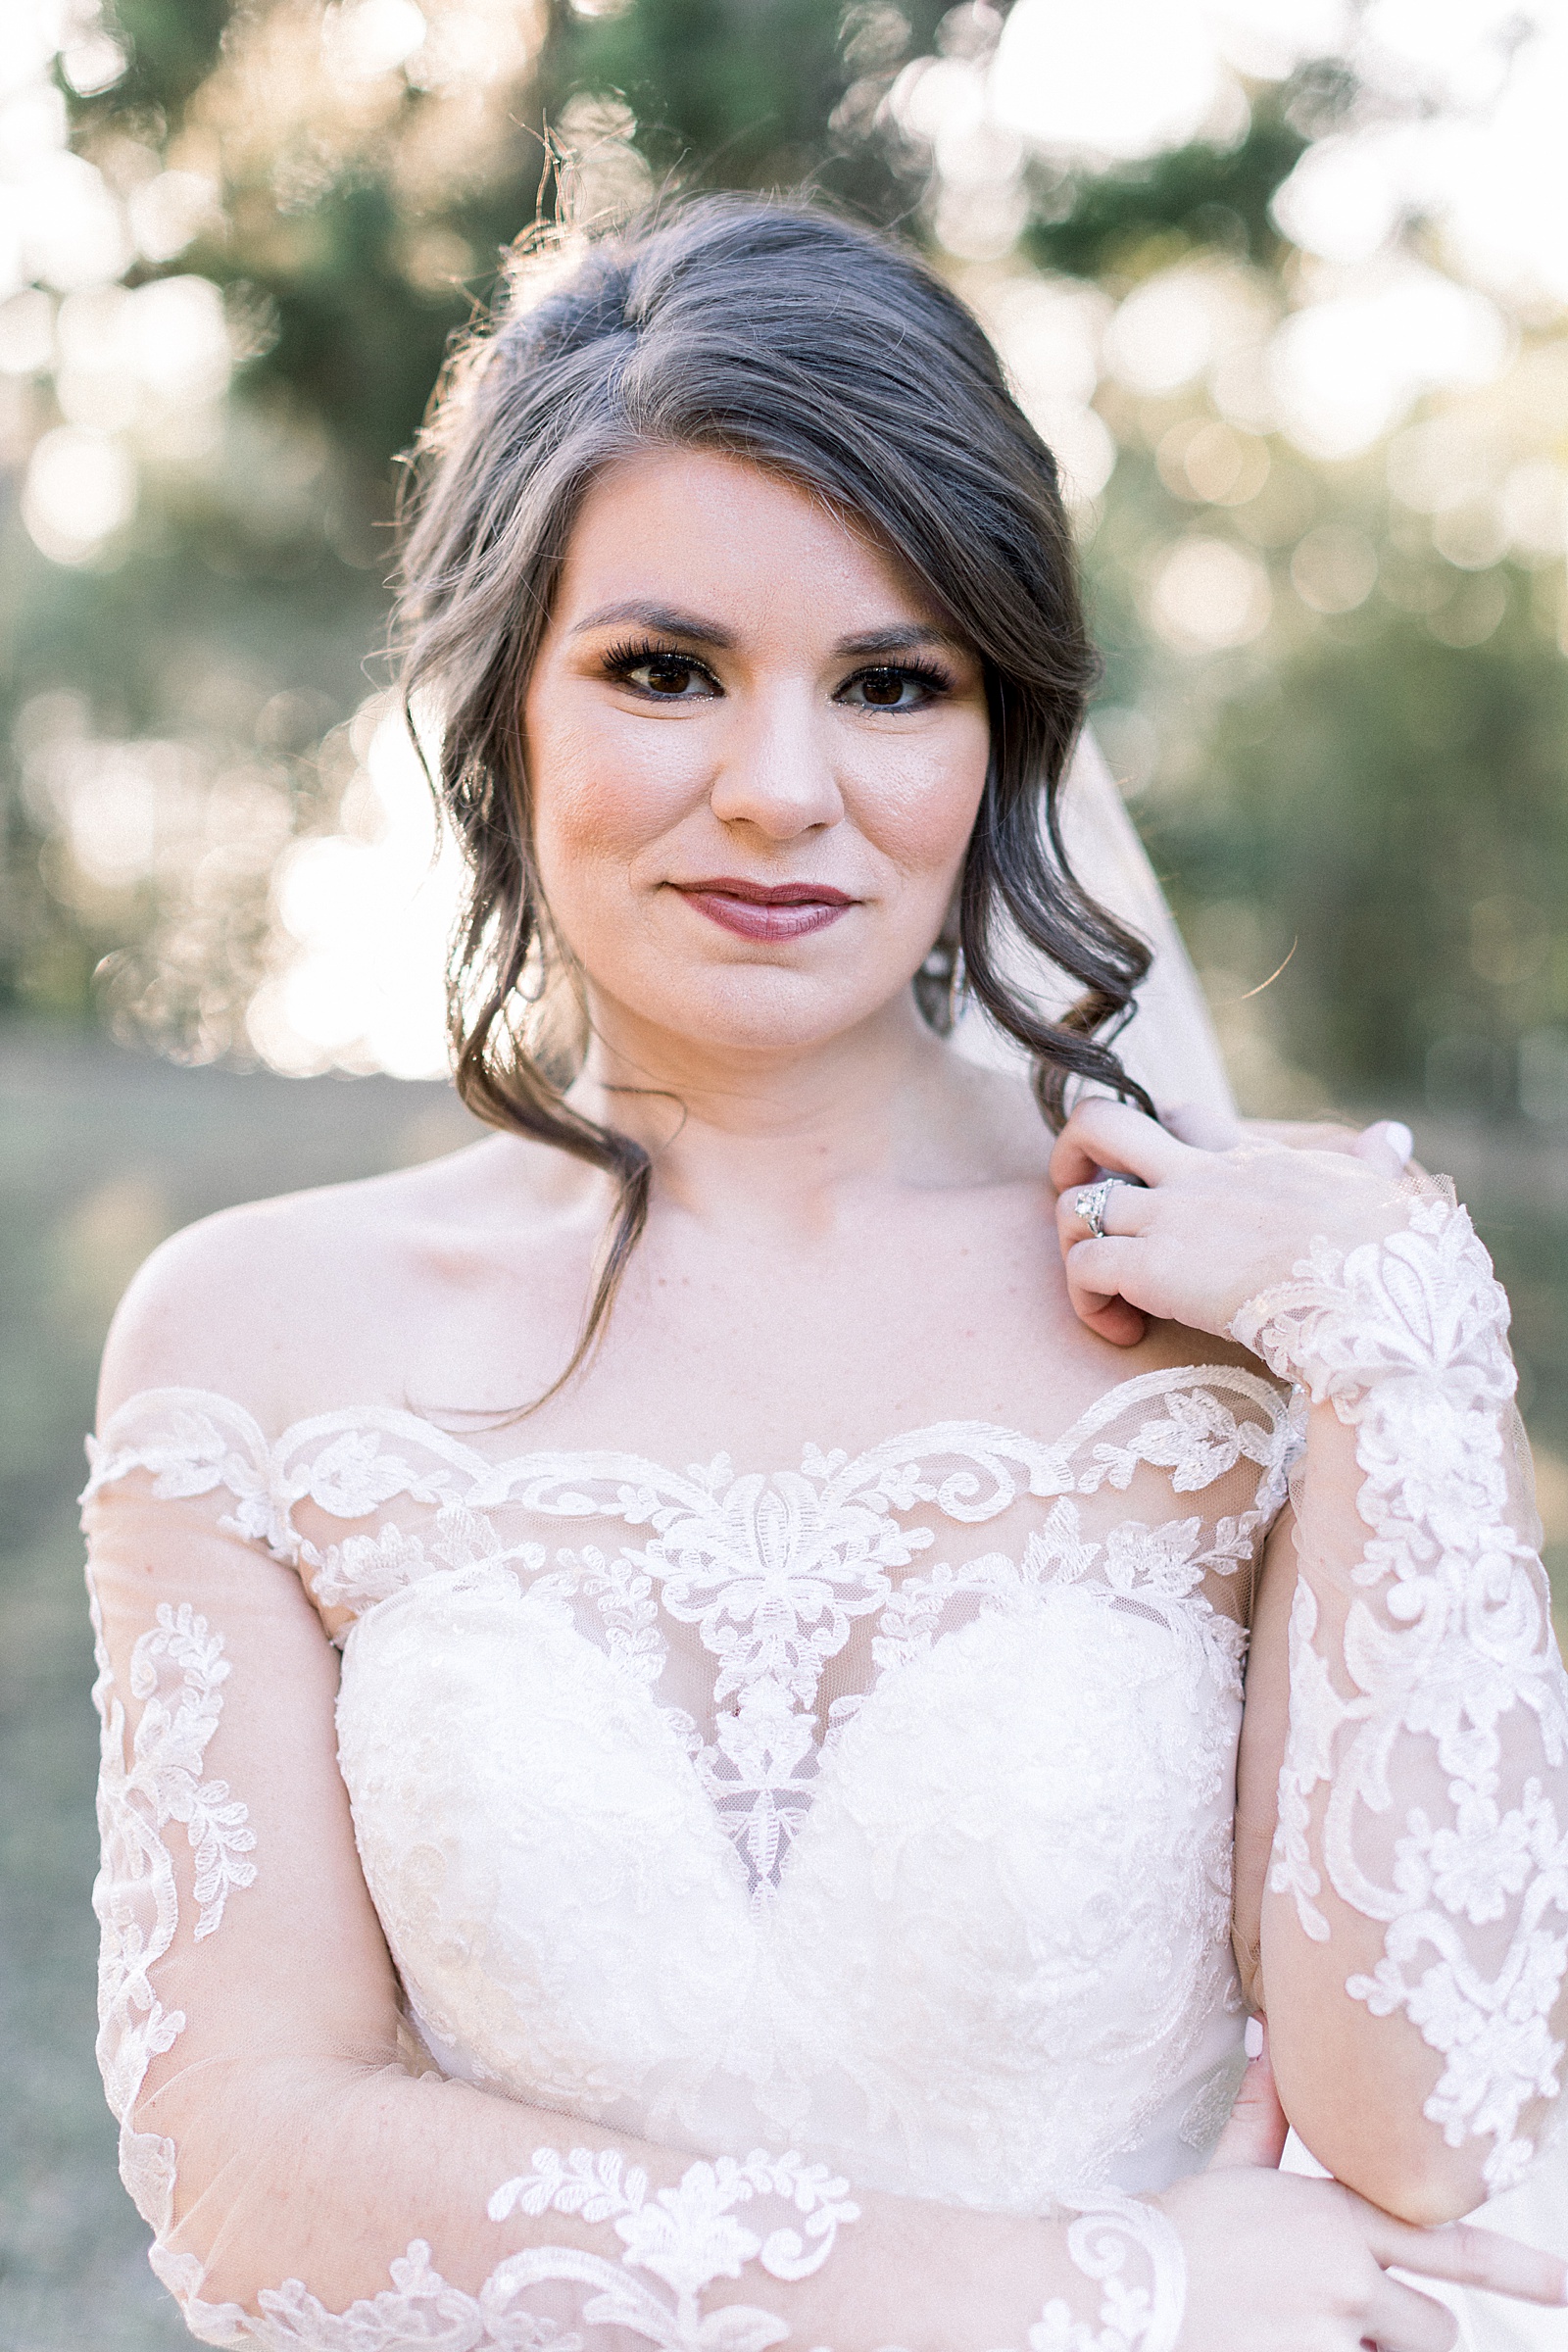 Lace Off the Shoulder Gown Bridal Session at Overlook Park, San Antonio, Anna Kay Photography, Wedding Photographer